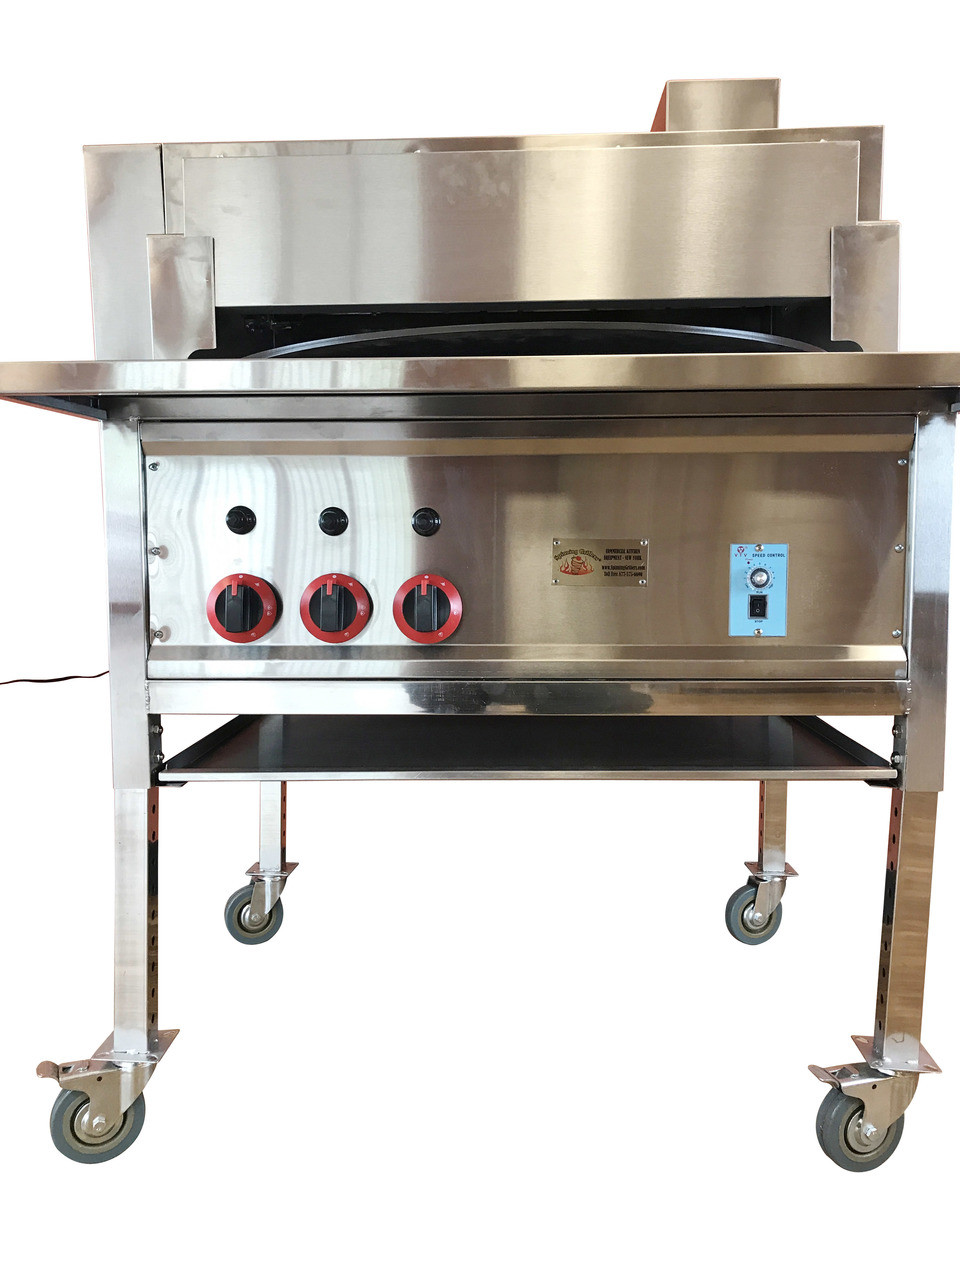 Pita Oven by SpinningGrillers- pita bread oven for your restuarant 